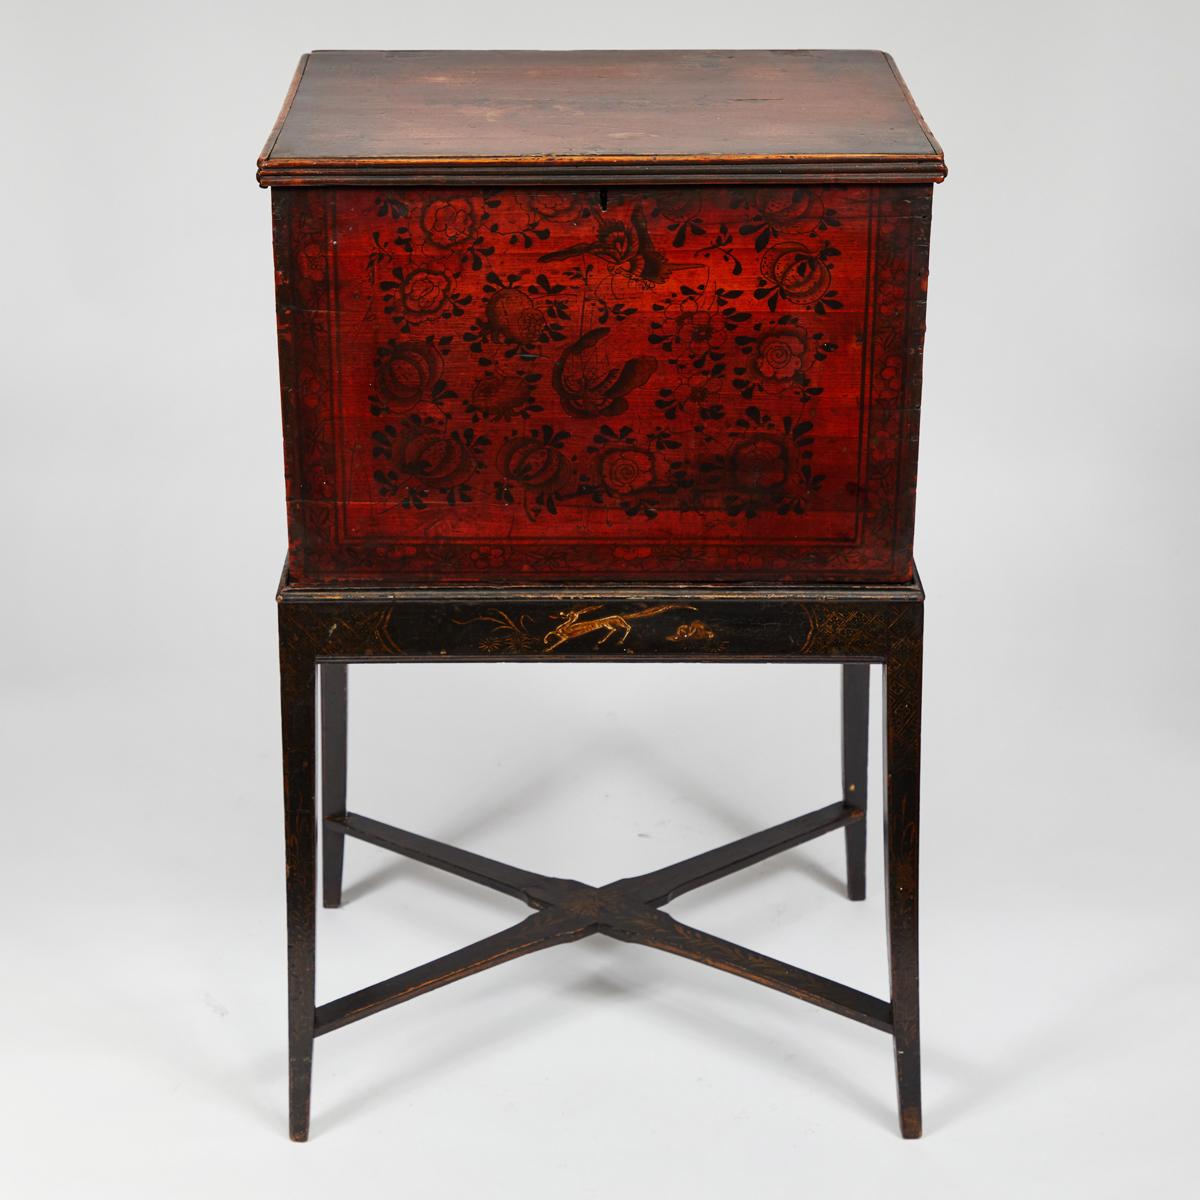 Late 19th-century English-imported tea box from China. Decorated with beautiful red and black hand-painted flora and fauna, and equipped with rectangular iron handles, the box is mounted on an ebonized wood base with handprinted decoration and a